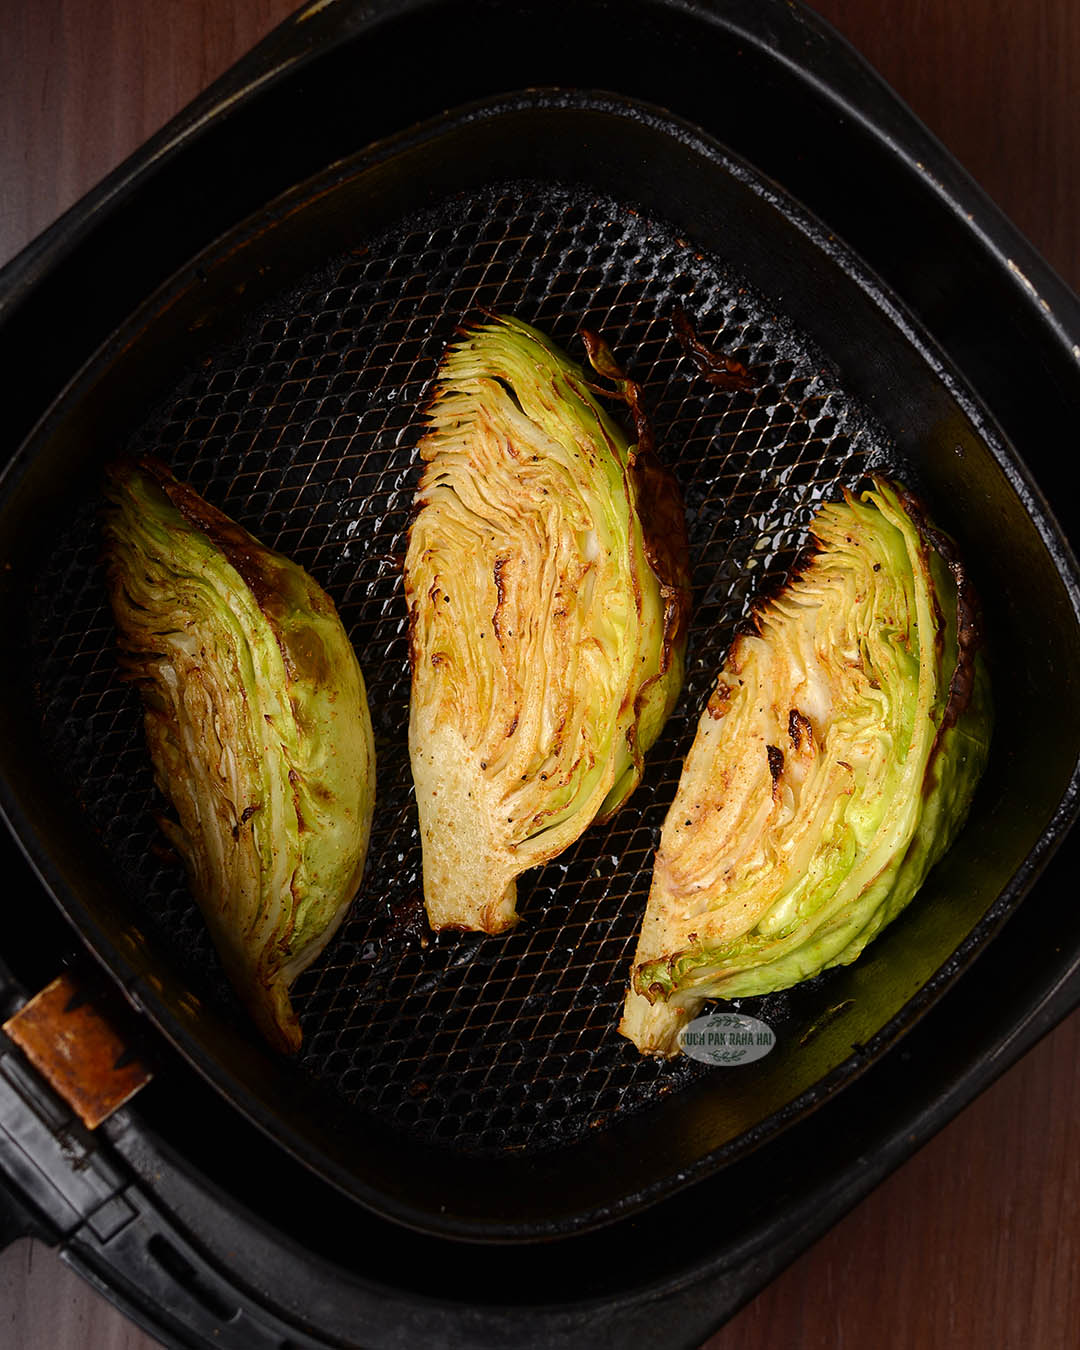 Roasted cabbage slices in air fryer.